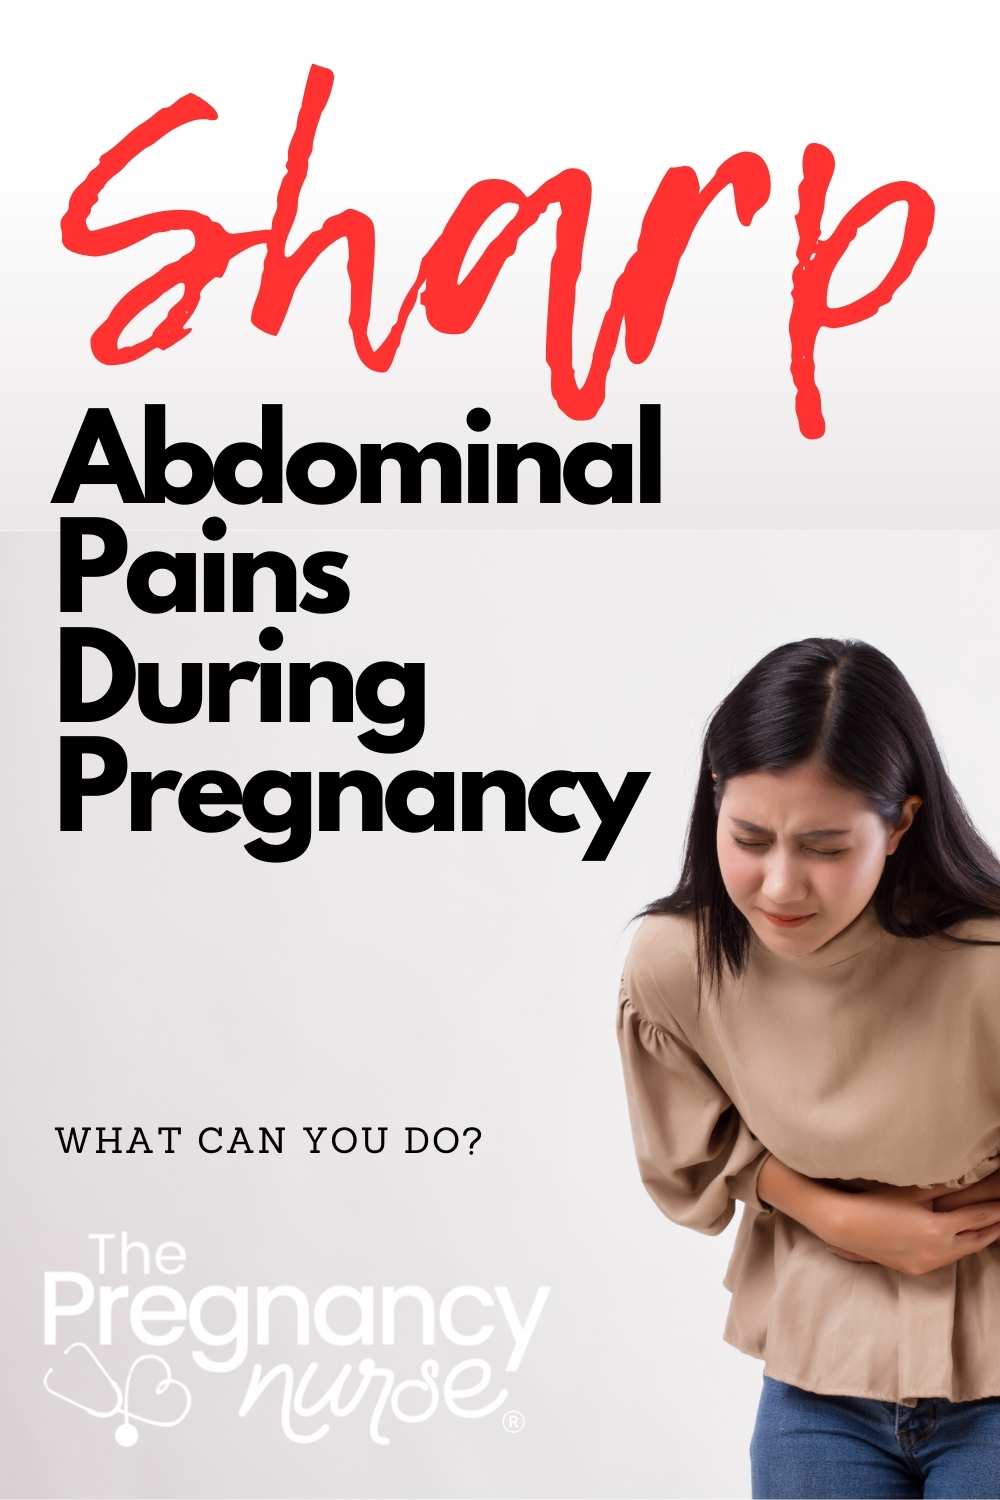 Journey through the ups and downs of being 21 weeks pregnant with this empowering guide. Understand, manage, and alleviate sharp lower abdominal pains. Don't let discomfort overshadow your incredible journey into motherhood. Embark on this path equipped with knowledge and comfort tips!